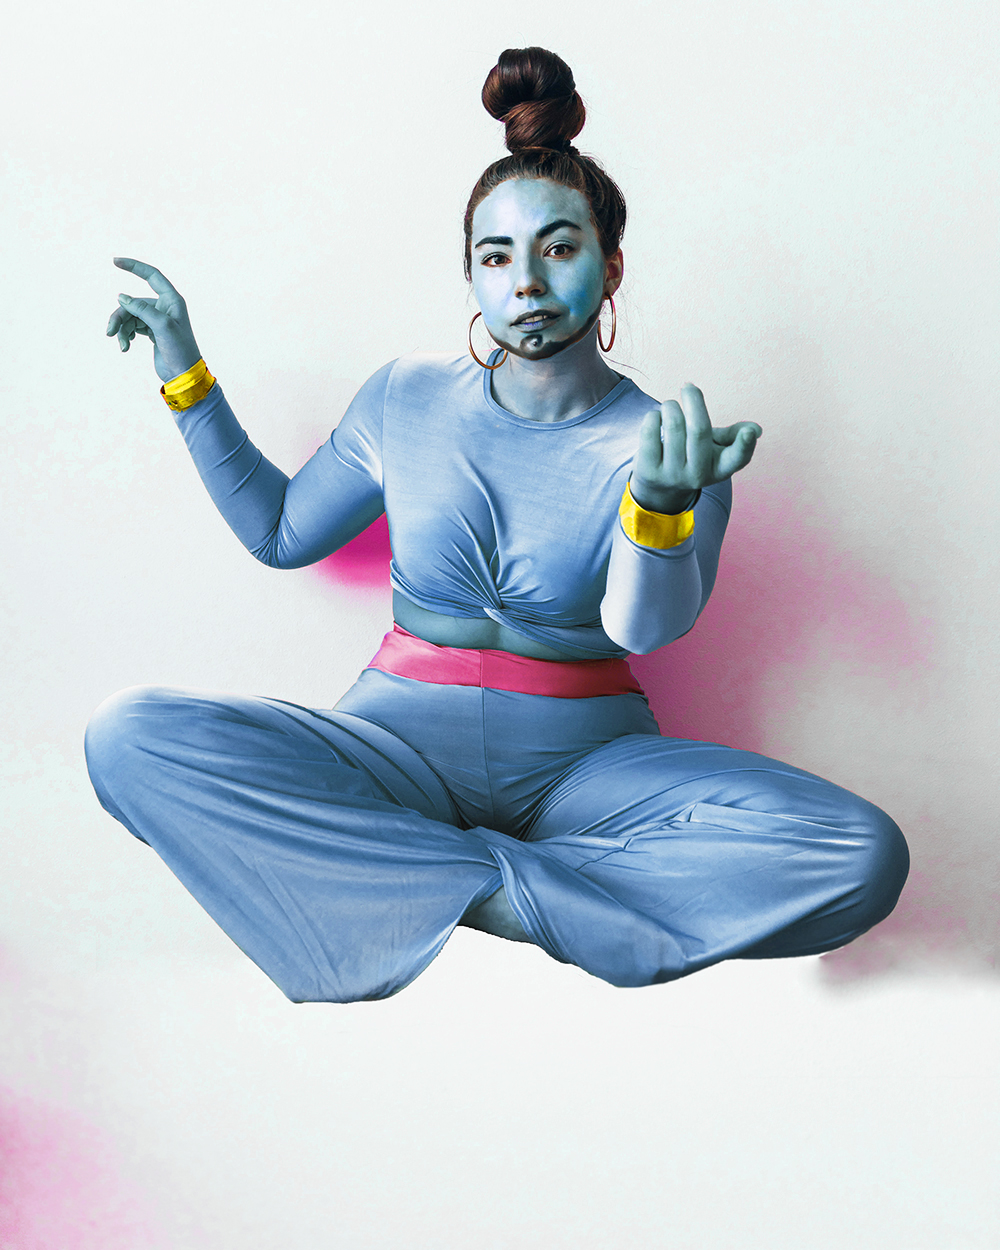 Lauryn Hock from Lauryncakes is dressed as Genie from Aladdin in head to to toe blue silk. She is floating in the air while her hair is in a bun on top of her head and she has a beard drawn on her face.